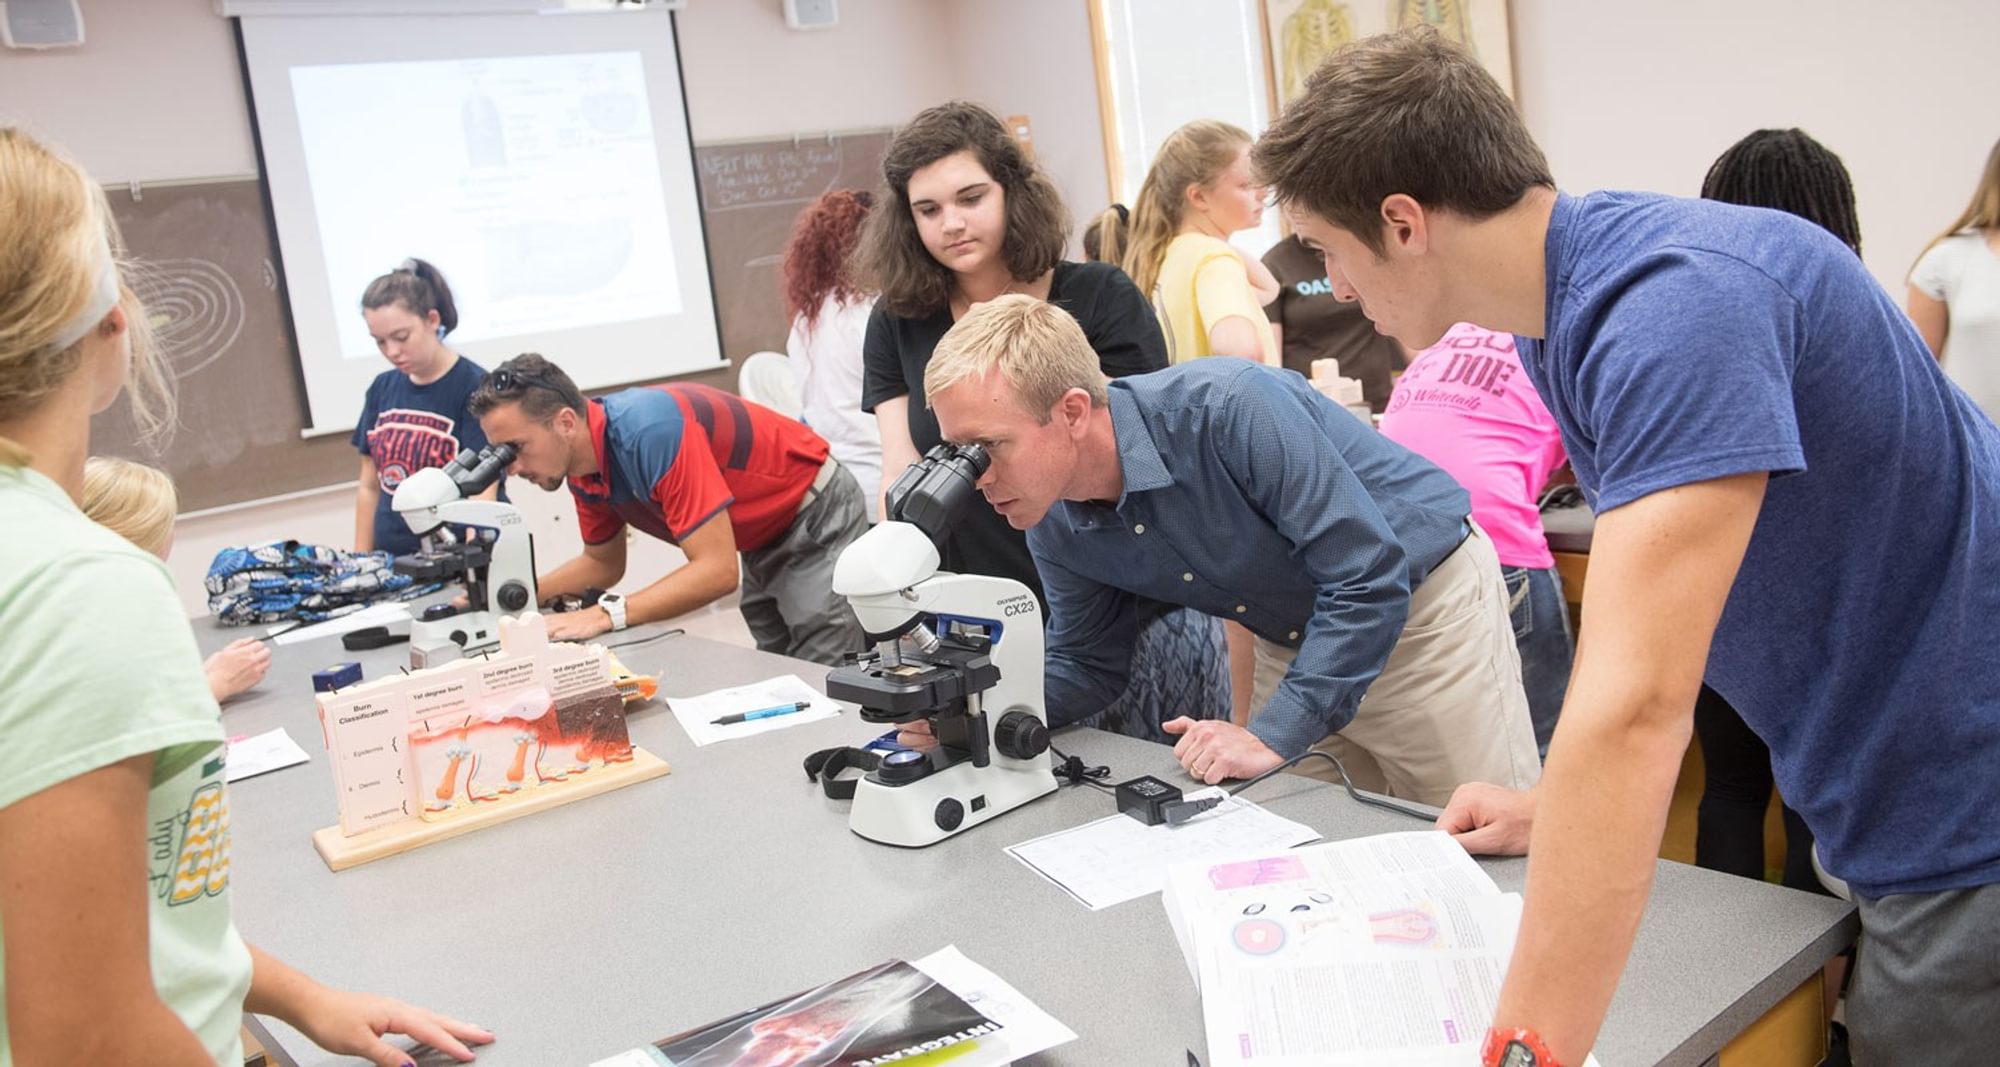 Students getting help with a microscope during a science lab